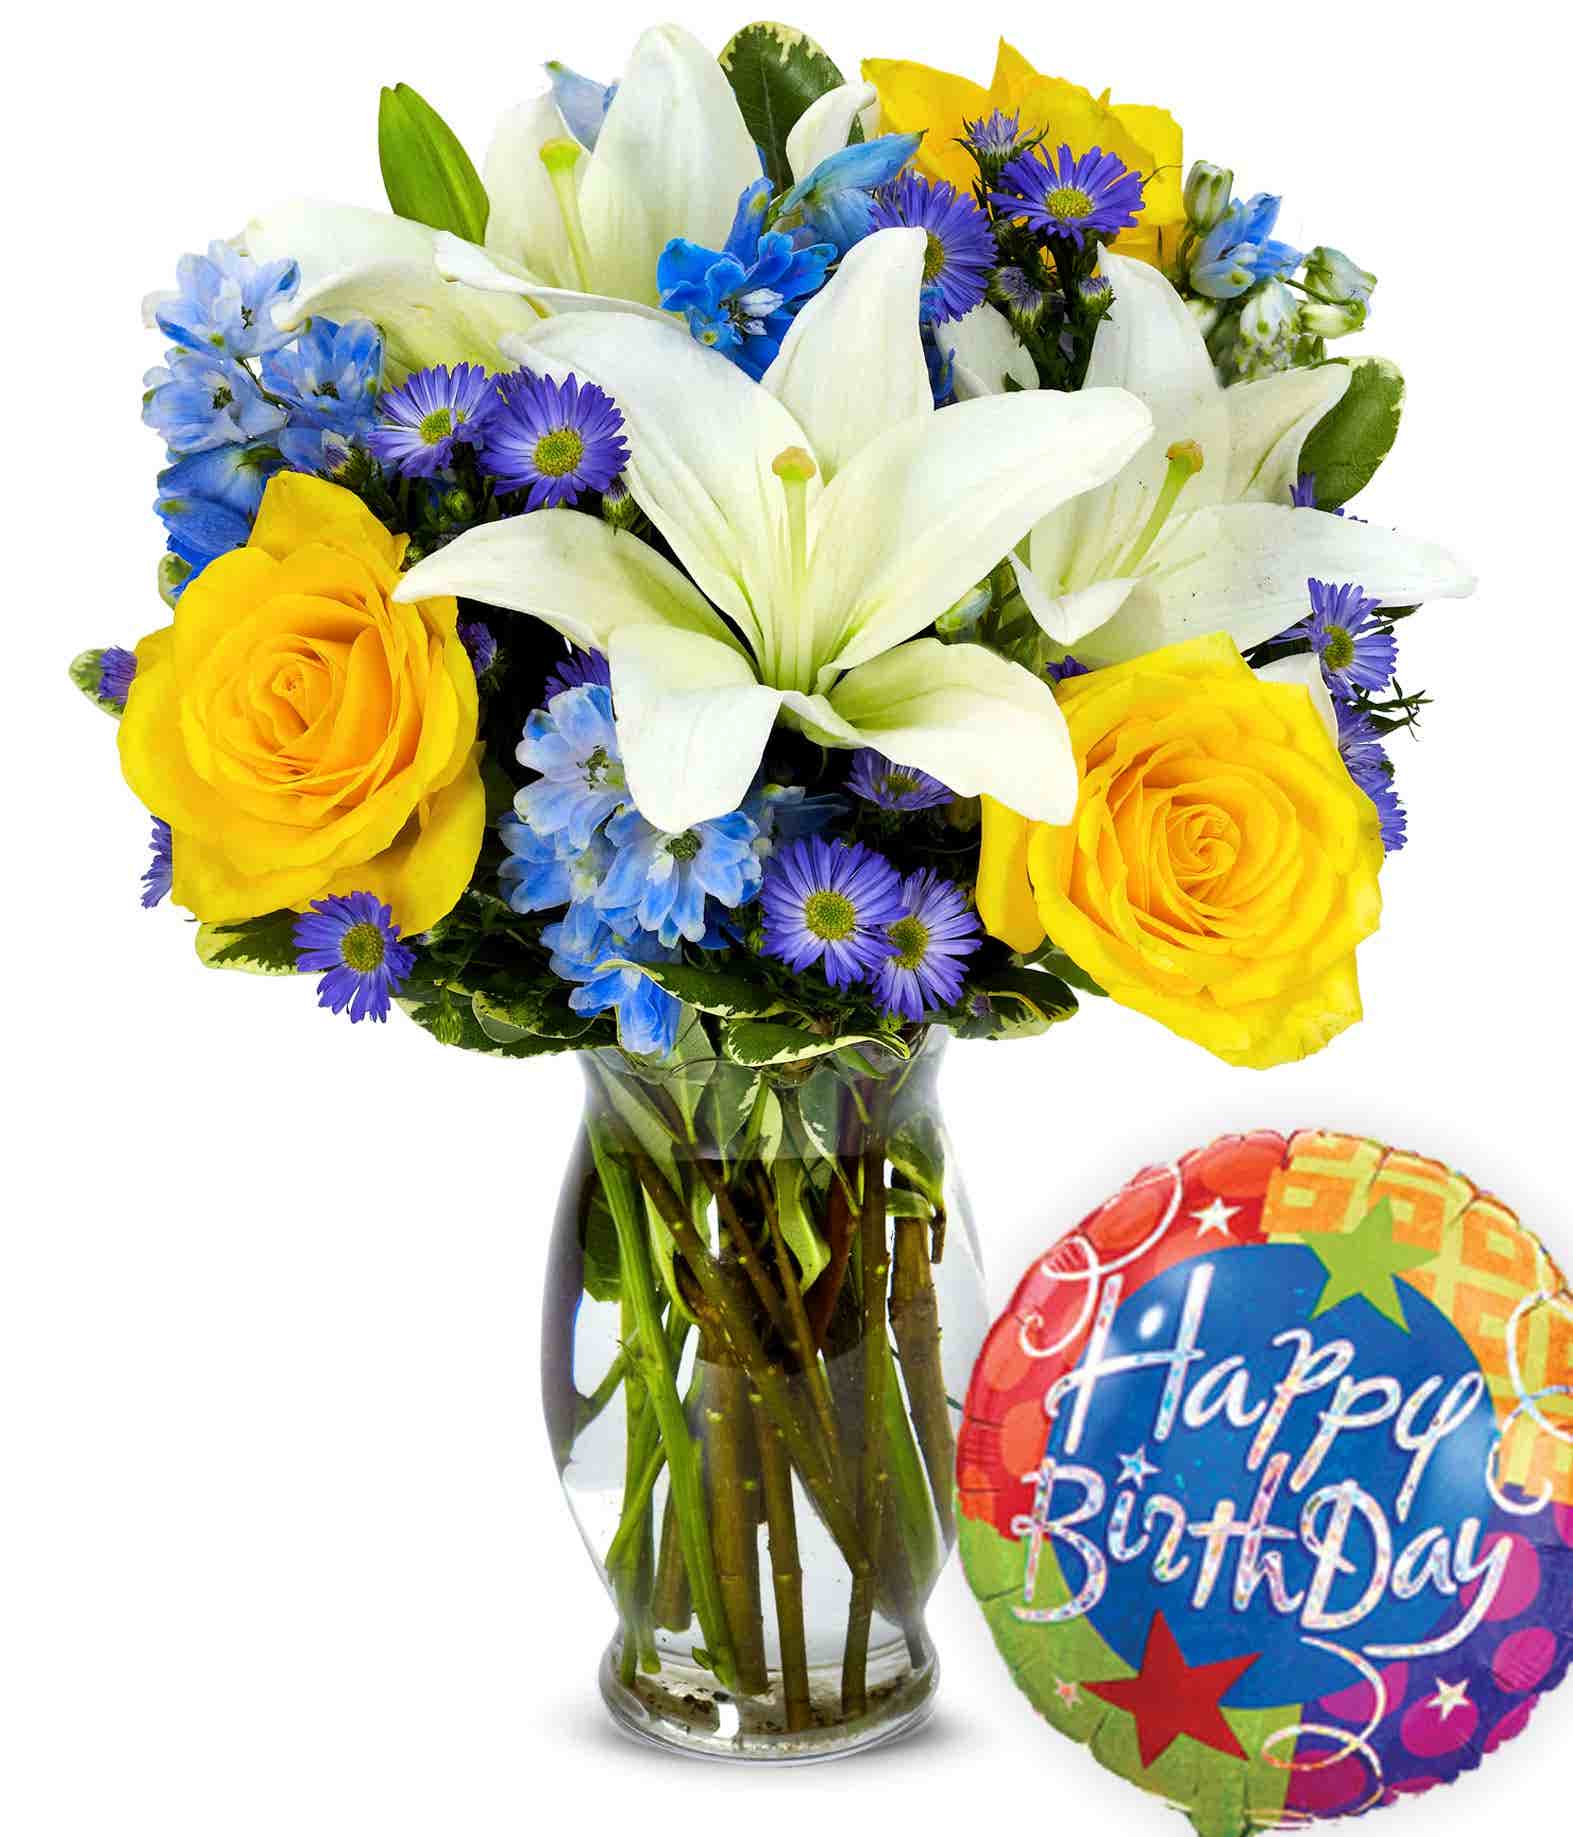 Happy Birthday Florist Designed Balloon Bouquet at From You Flowers